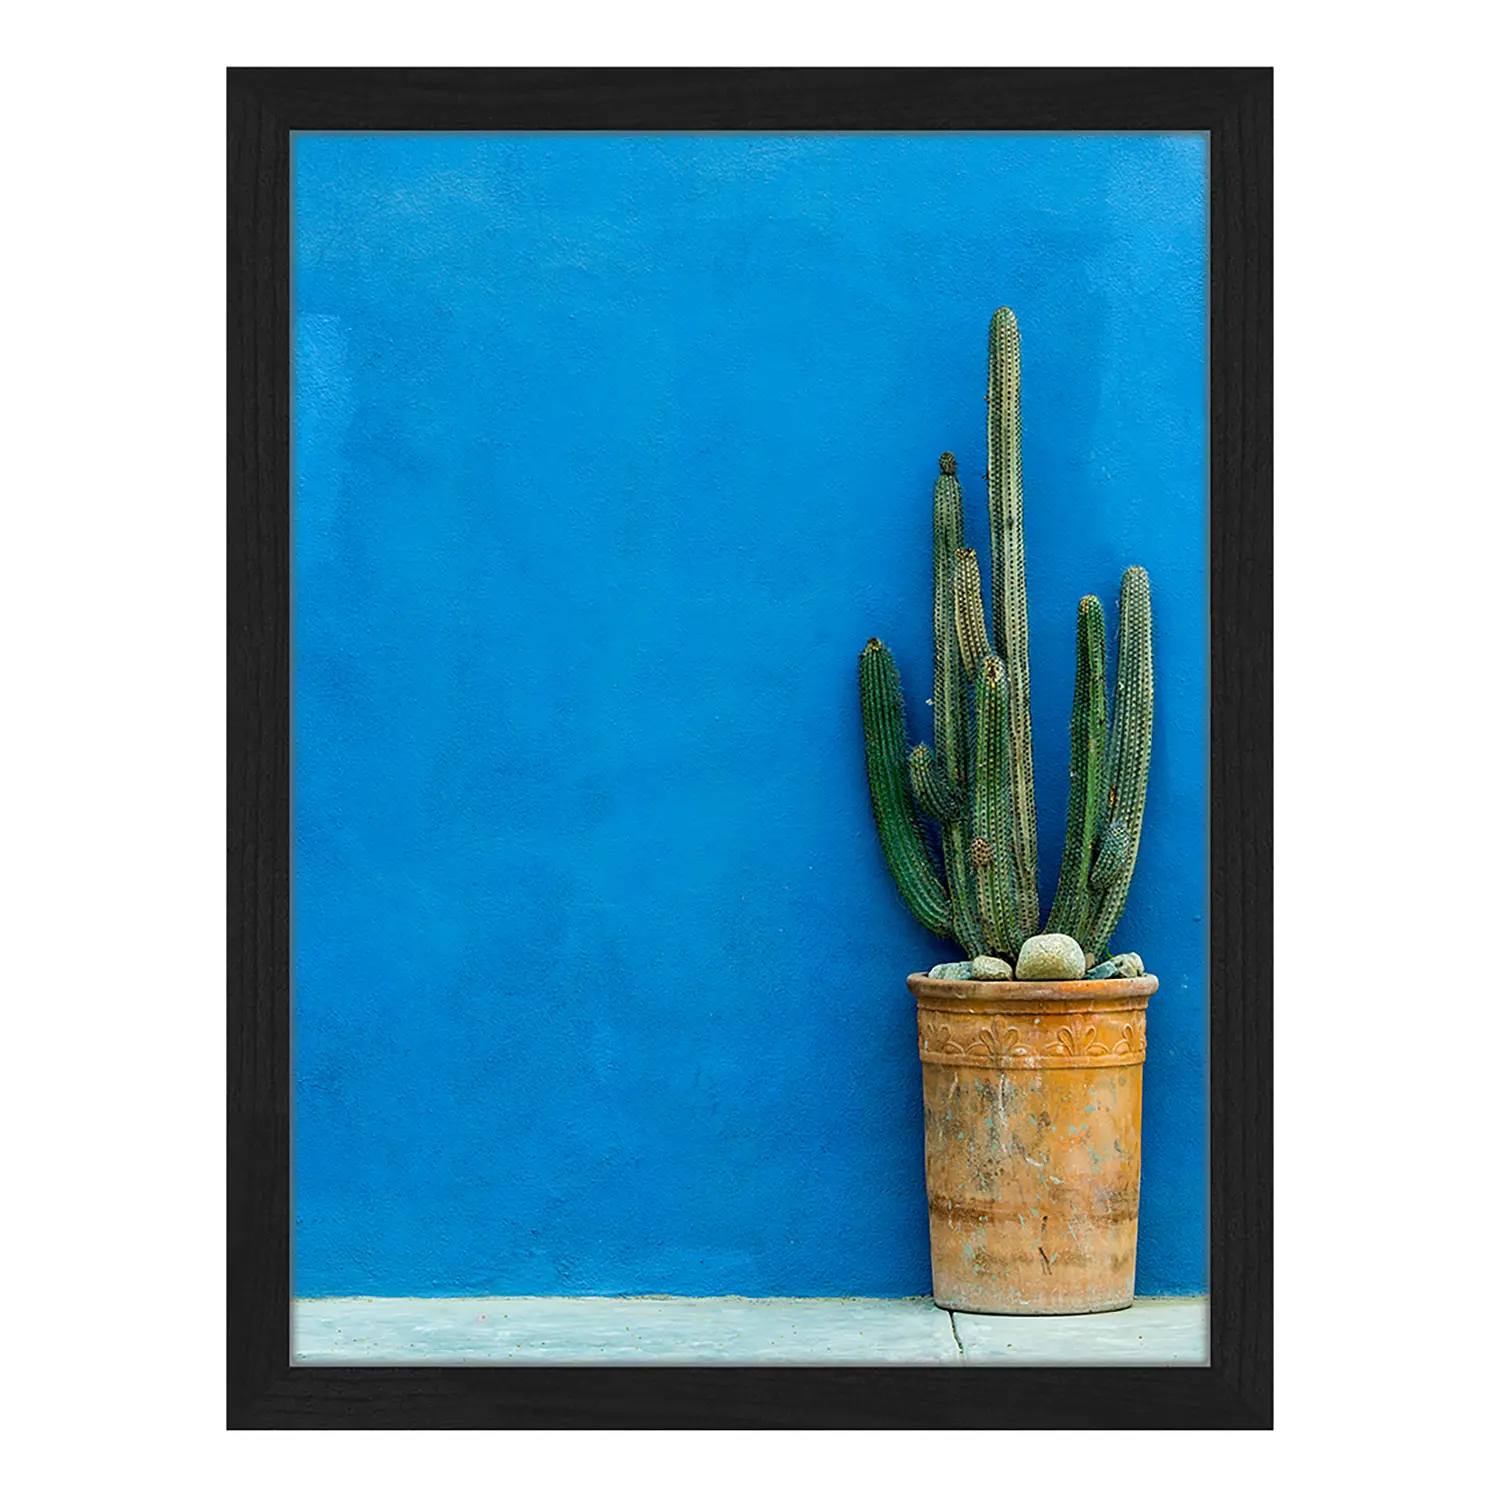 Bild Blue Wall Cactus with